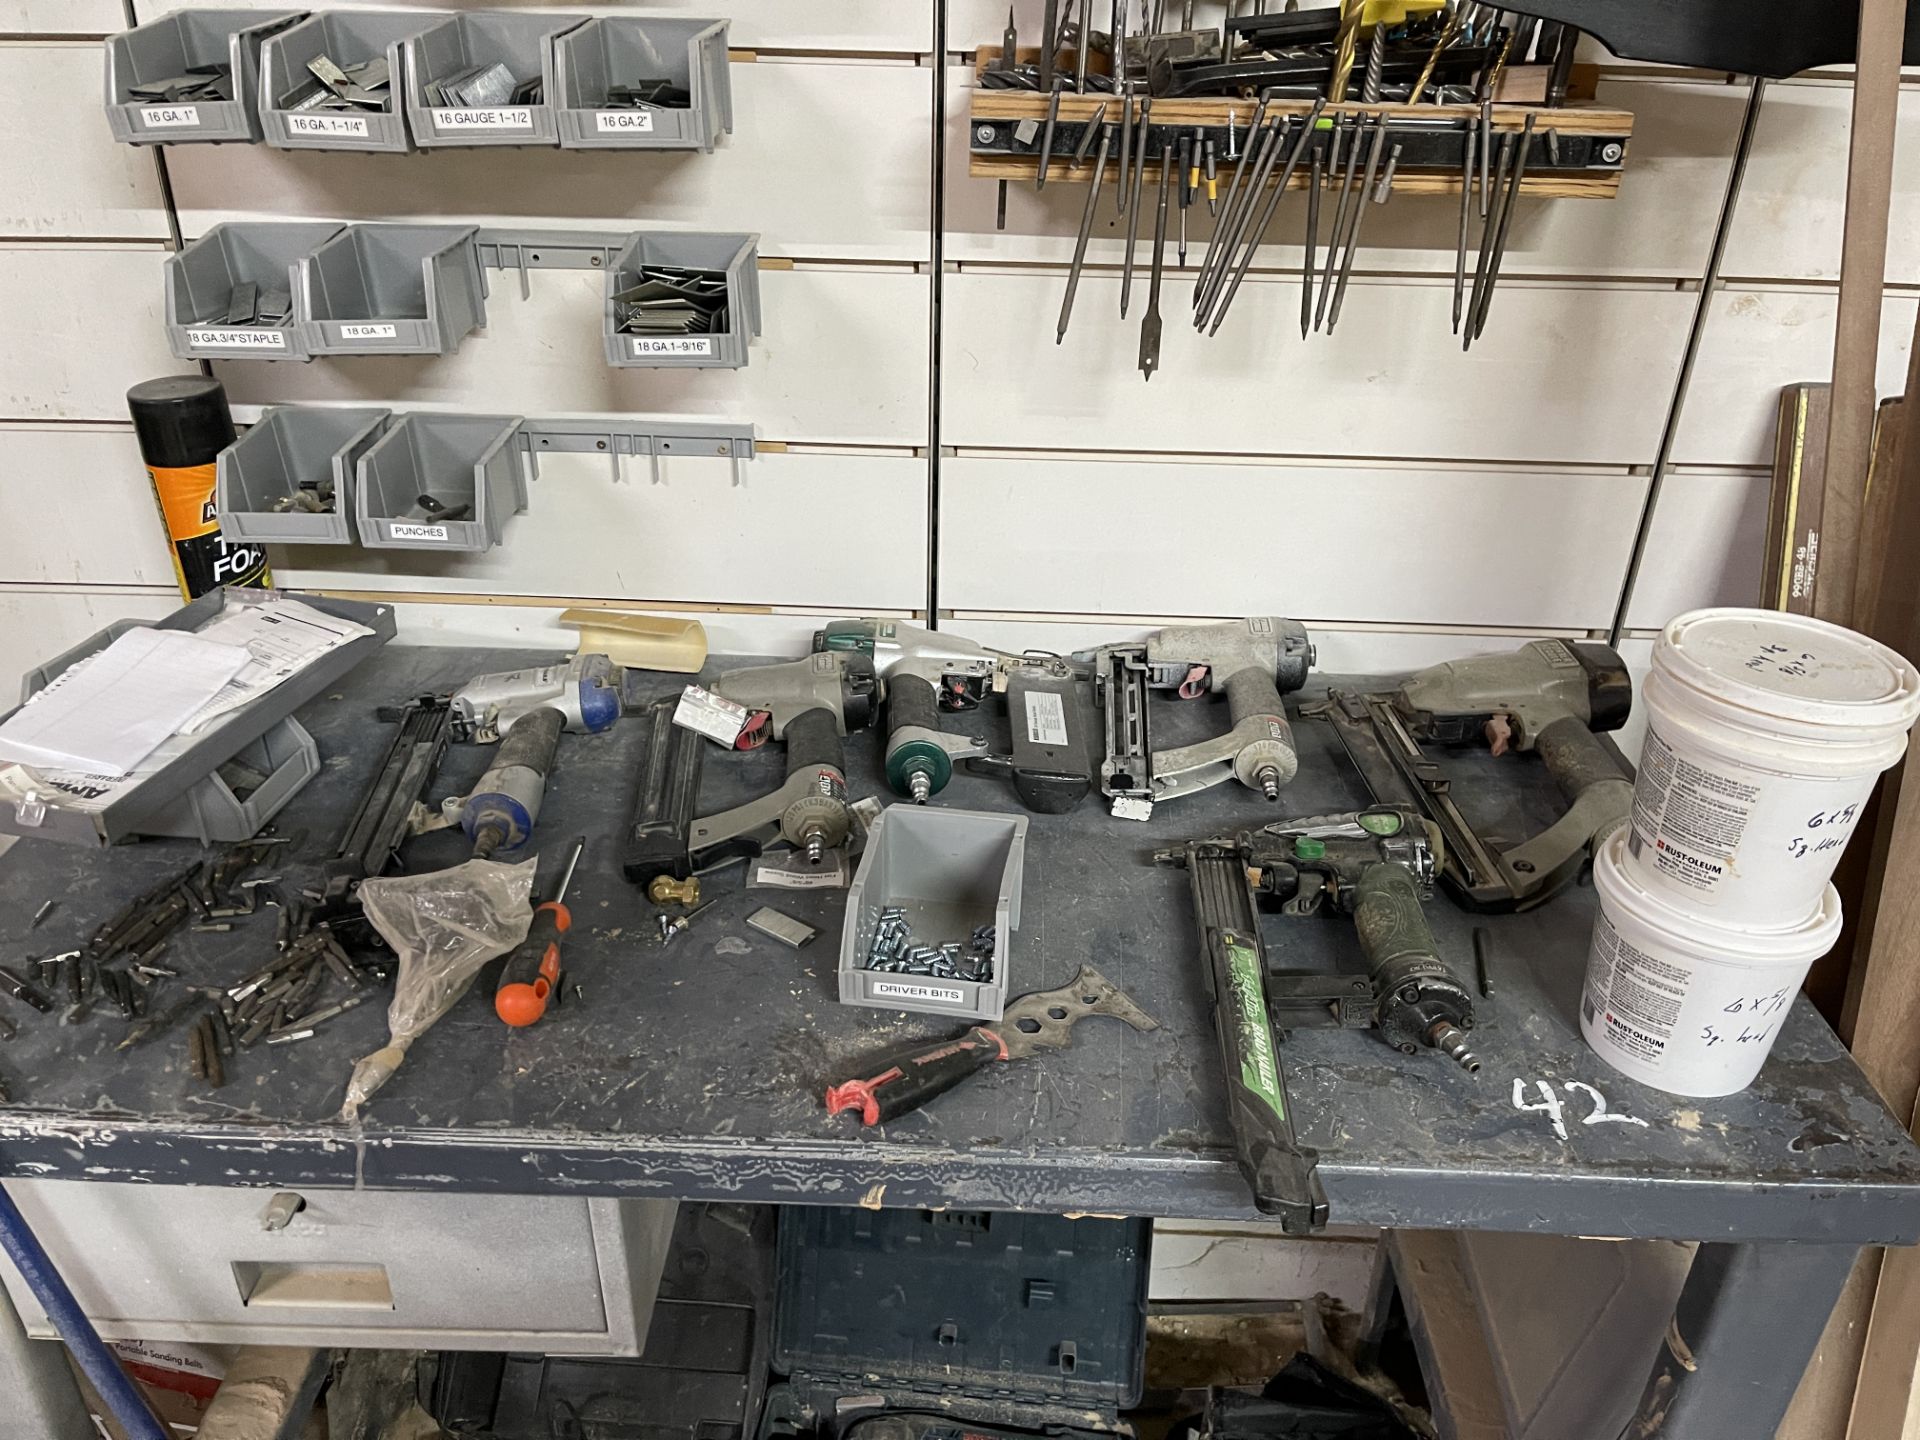 Work Table with 6 Pneumatic Nailers